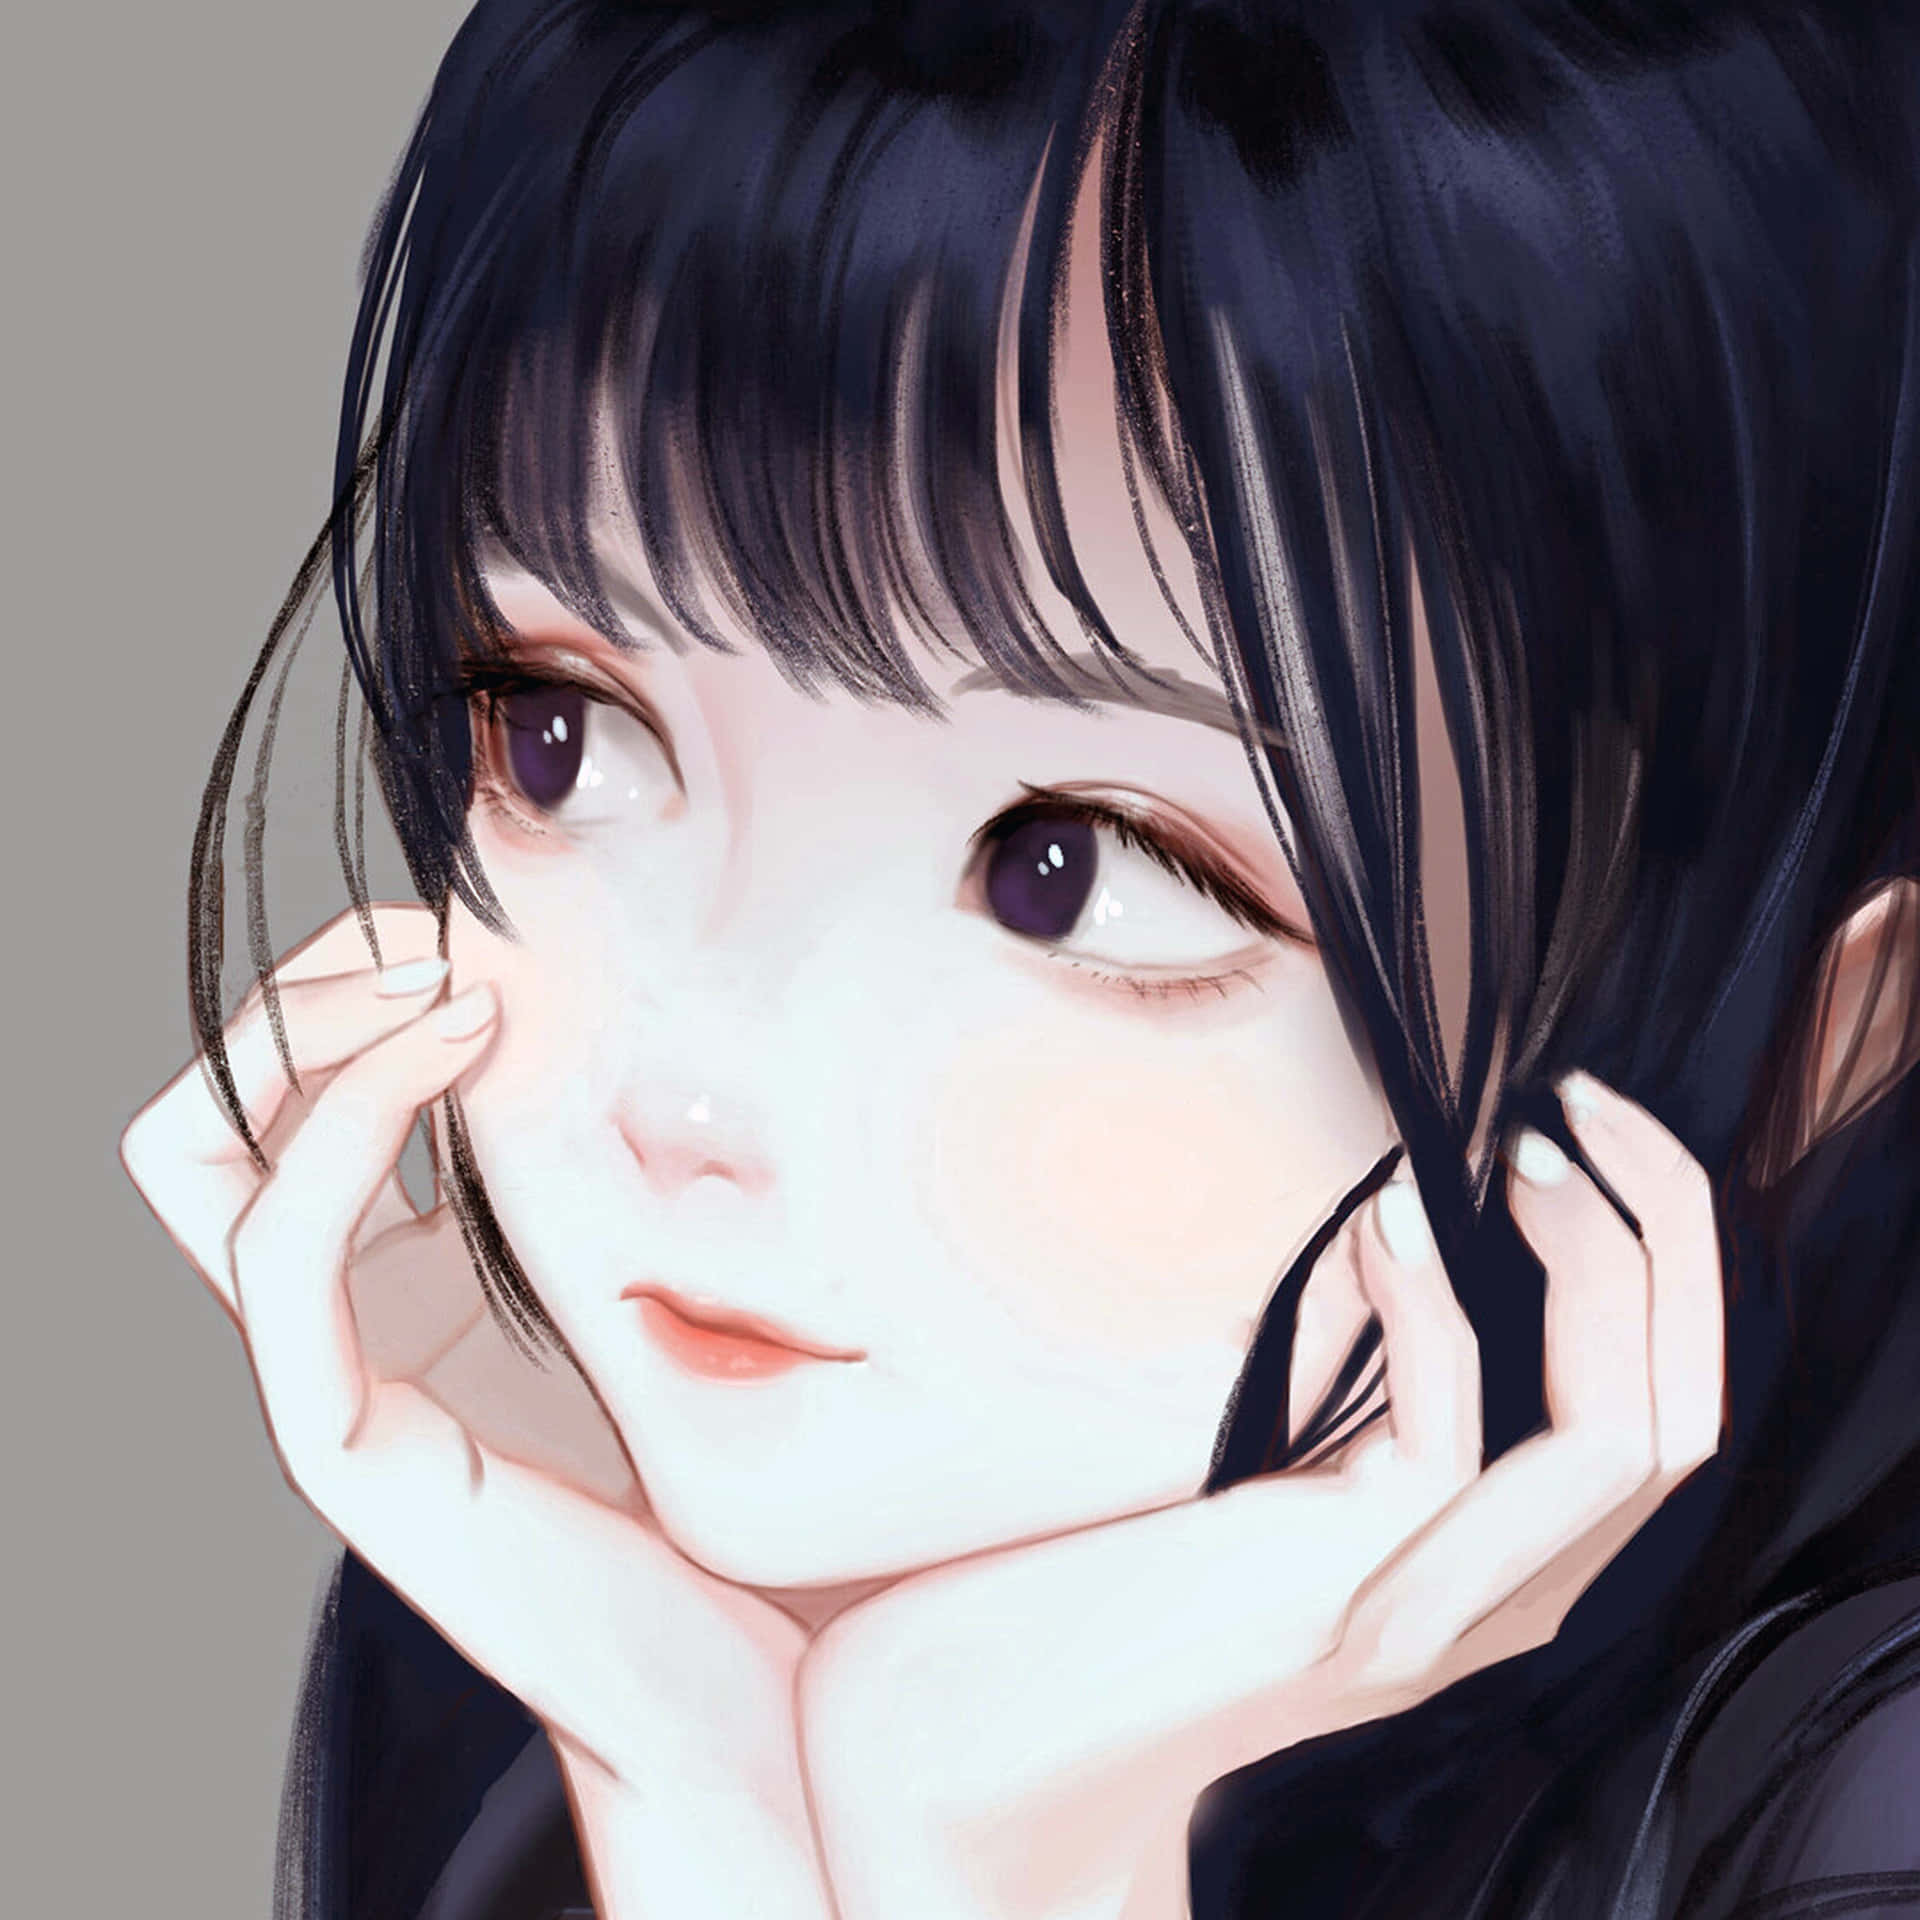 Download Korean Anime Girl With Pretty Face Wallpaper 